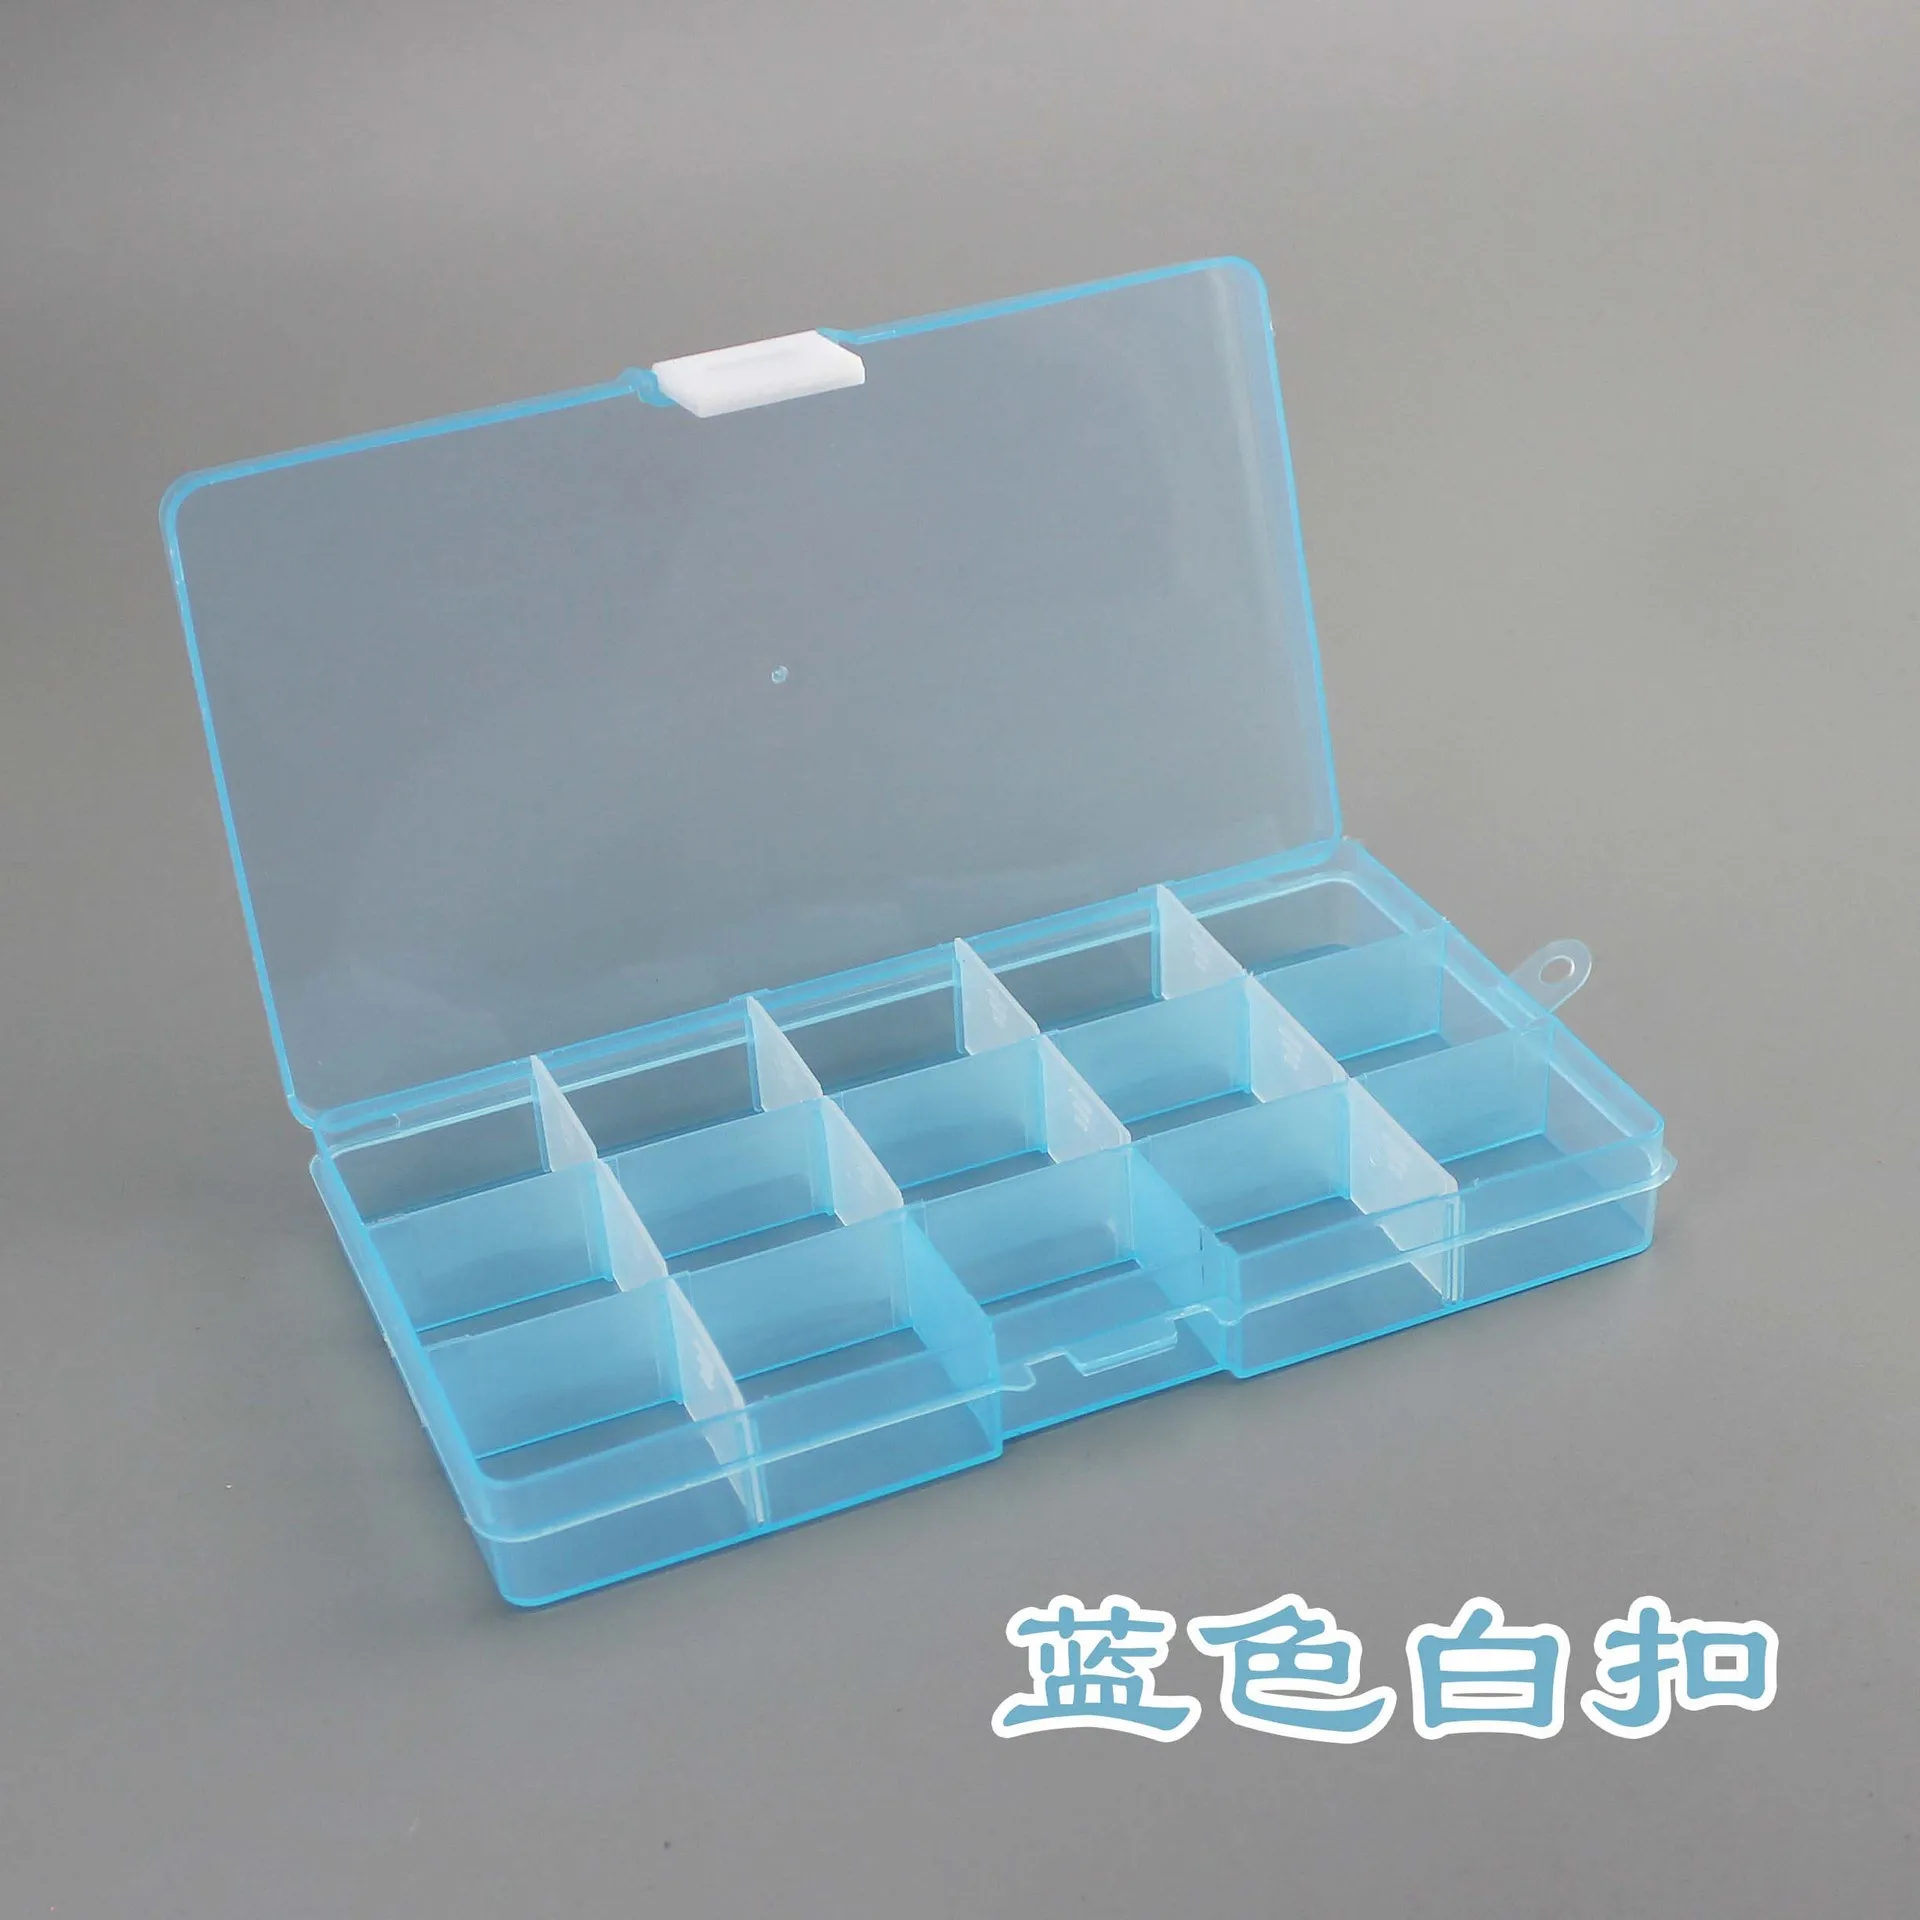 Partition box transparent can be assembled and disassembled small  15-compartment storage plastic box desk organizer stationery